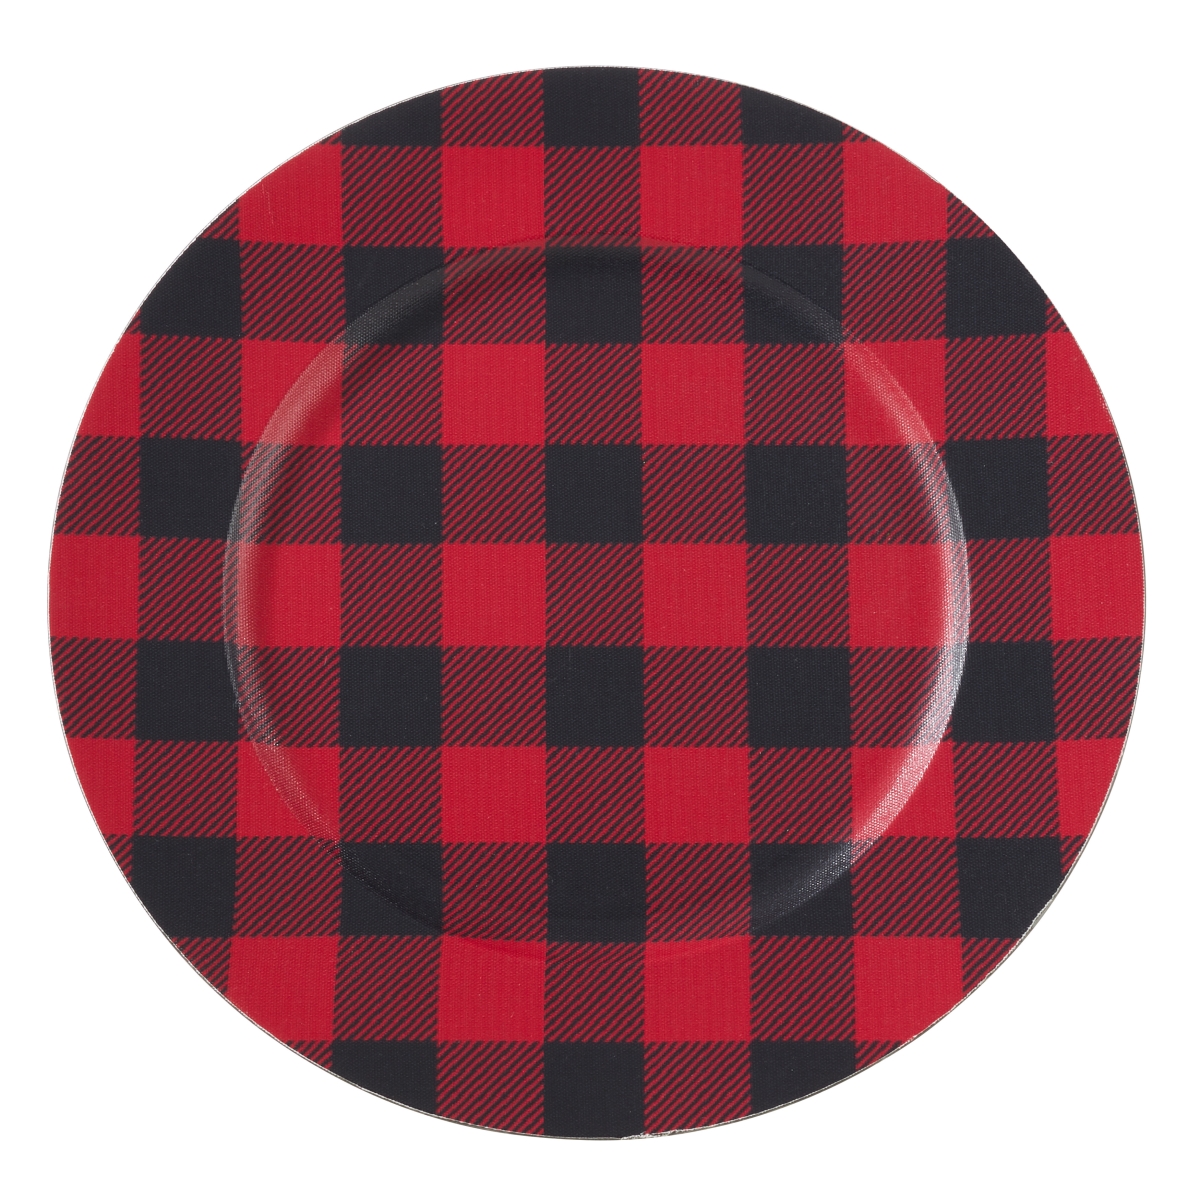 Ch801.r14r 14 In. Round Table Chargers With Buffalo Plaid Design - Red, Set Of 4